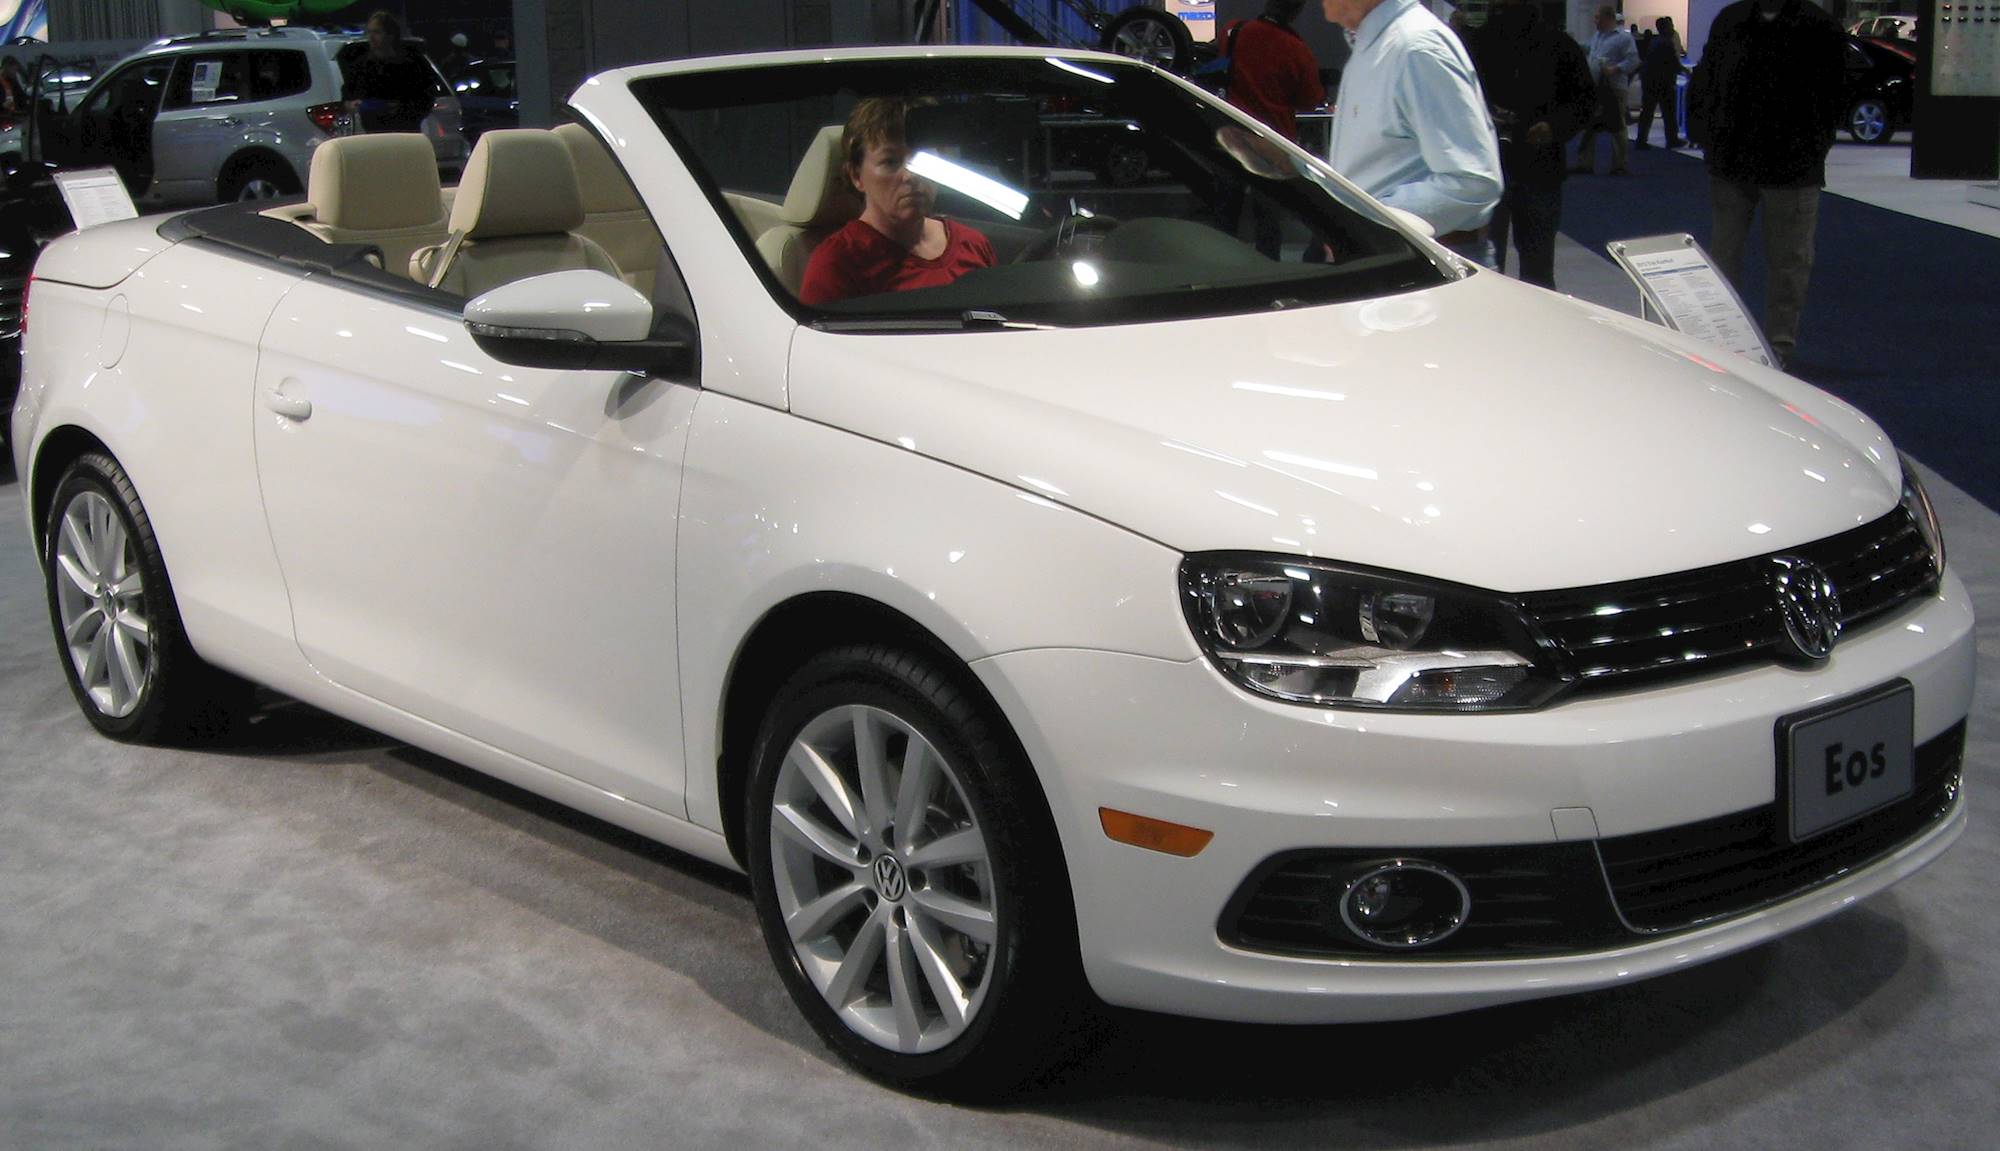 2012 Volkswagen Eos Lux SULEV - Convertible 2.0L Turbo Automated Manual